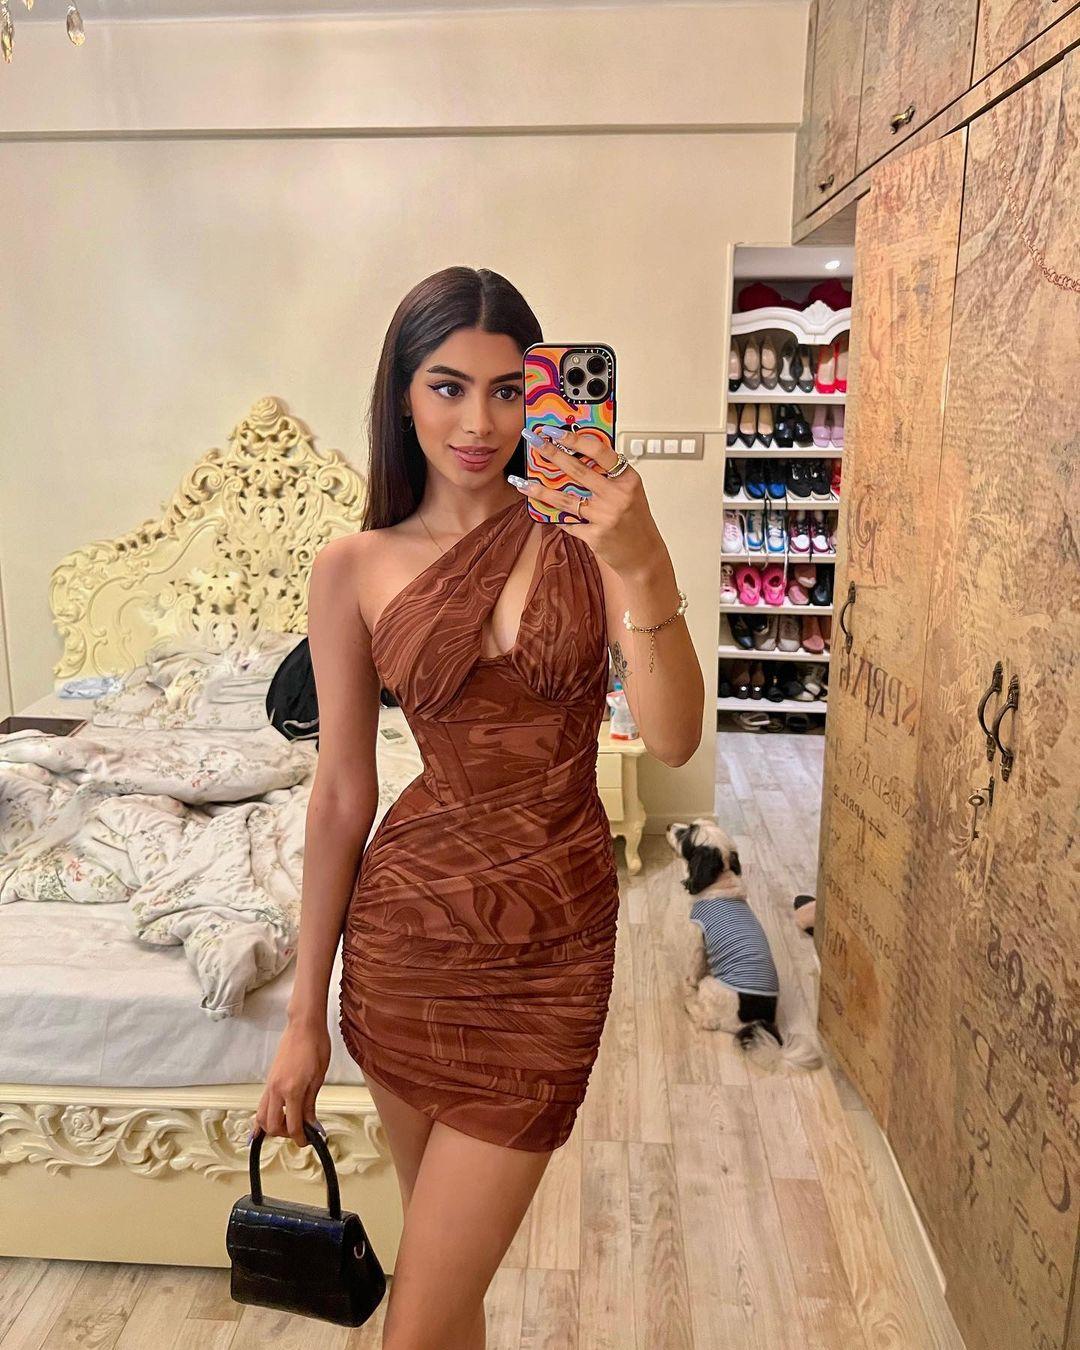 Khushi rocked a bodycon dress adorned with a stunning brown pattern—a soft power mesh dress featuring a captivating chocolate swirl design. The dress boasts an asymmetrical style, gracefully sweeping across one shoulder and sporting a chest slit that hints at a touch of cleavage. It's the perfect mix between bold and class - making it perfect for Christmas!